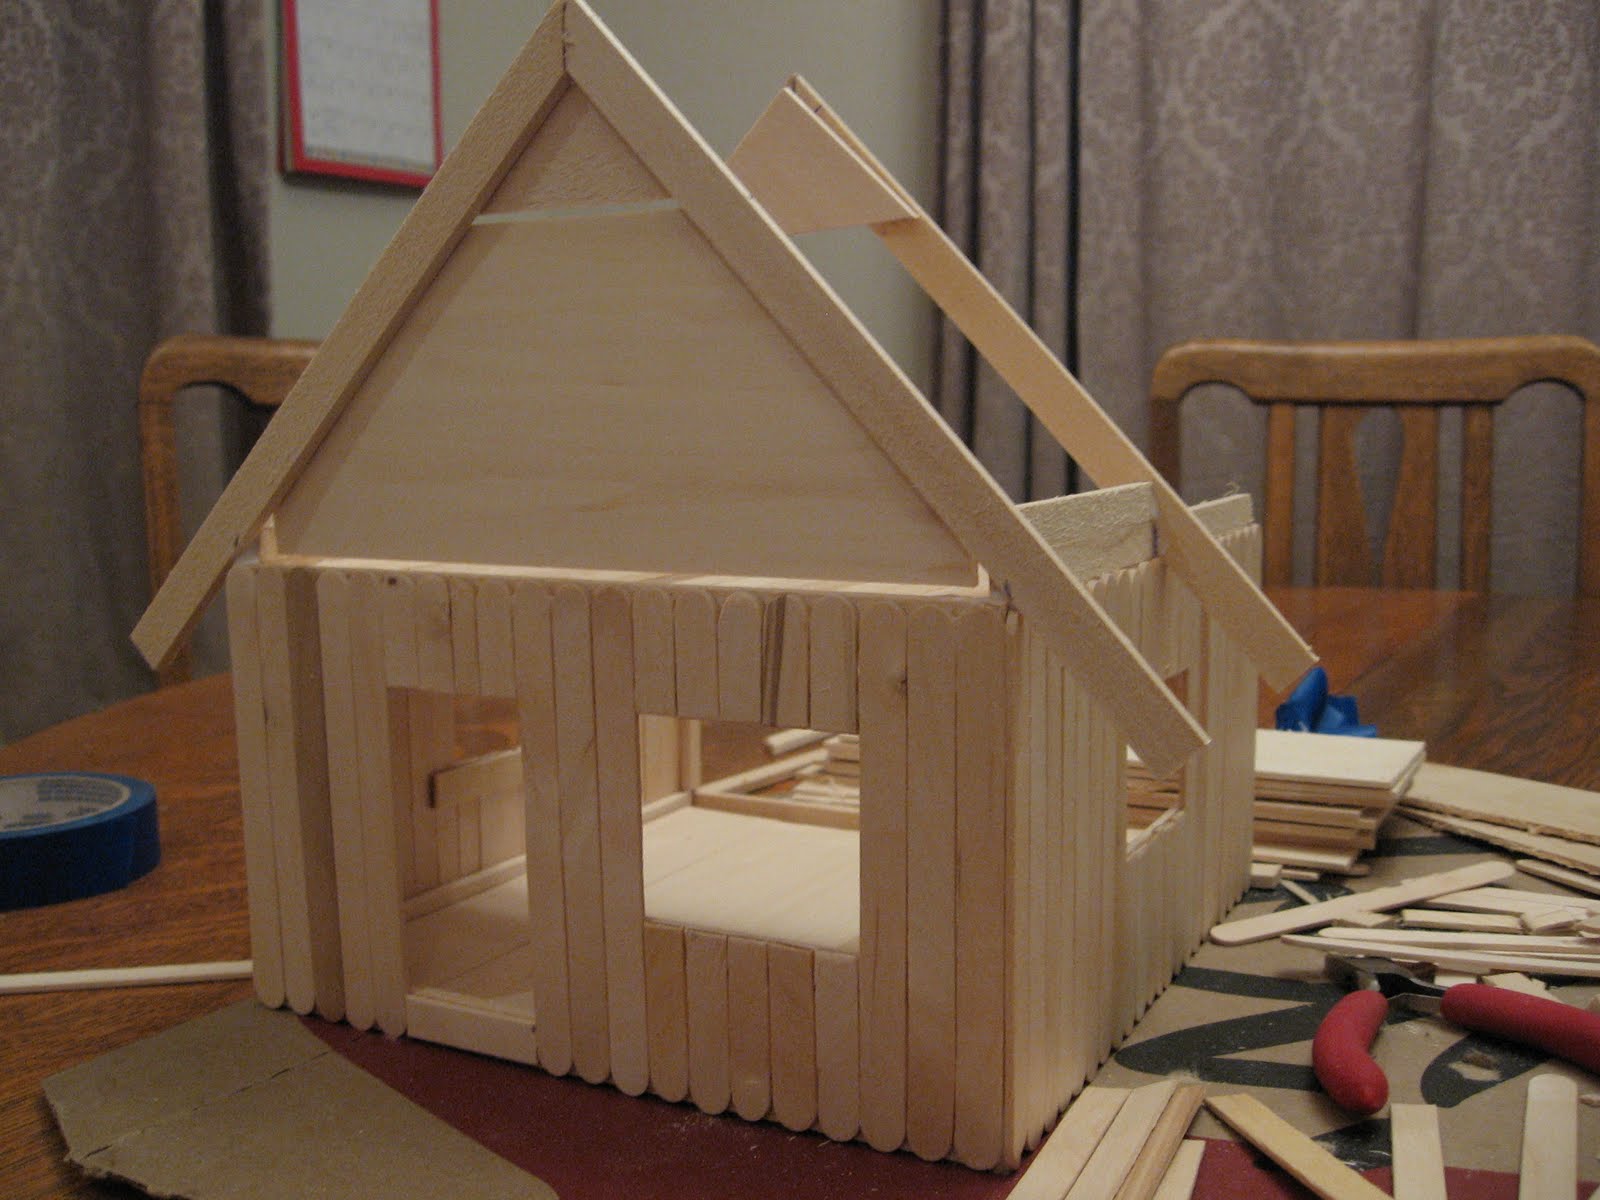 Create and Construct with Popsicle Sticks - This Little Home of Mine